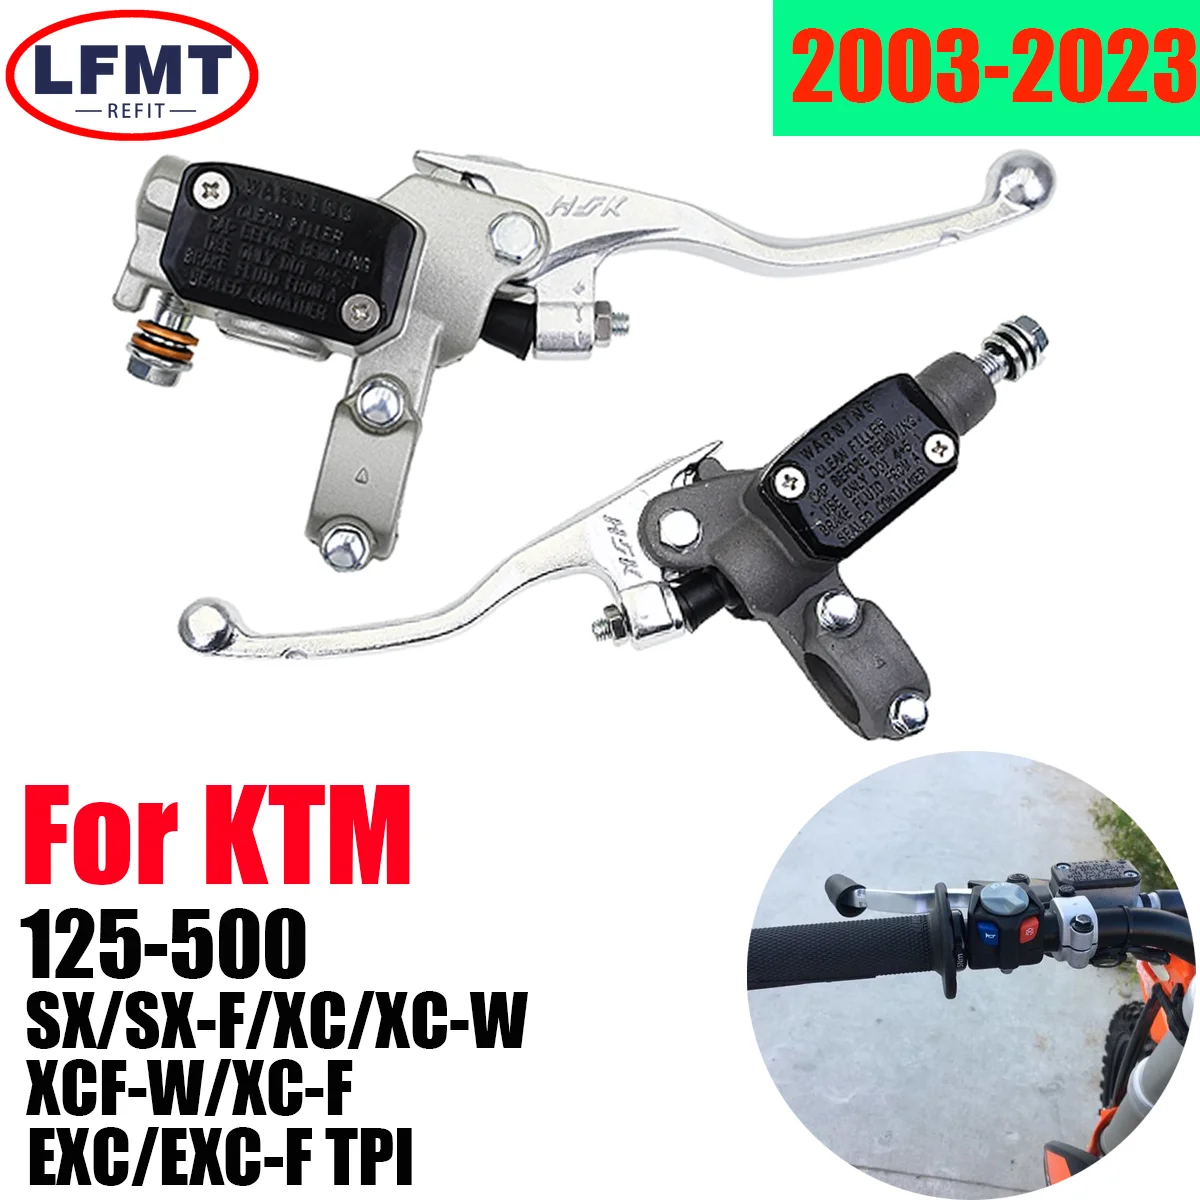 

22mm 7/8'' Right/Left Brake Master Cylinder Clutch Pump Brake Lever Motorcycle For KTM SX/SX-F/XC/XC-W/XCF-W/XC-F/EXC/EXC-F TPI